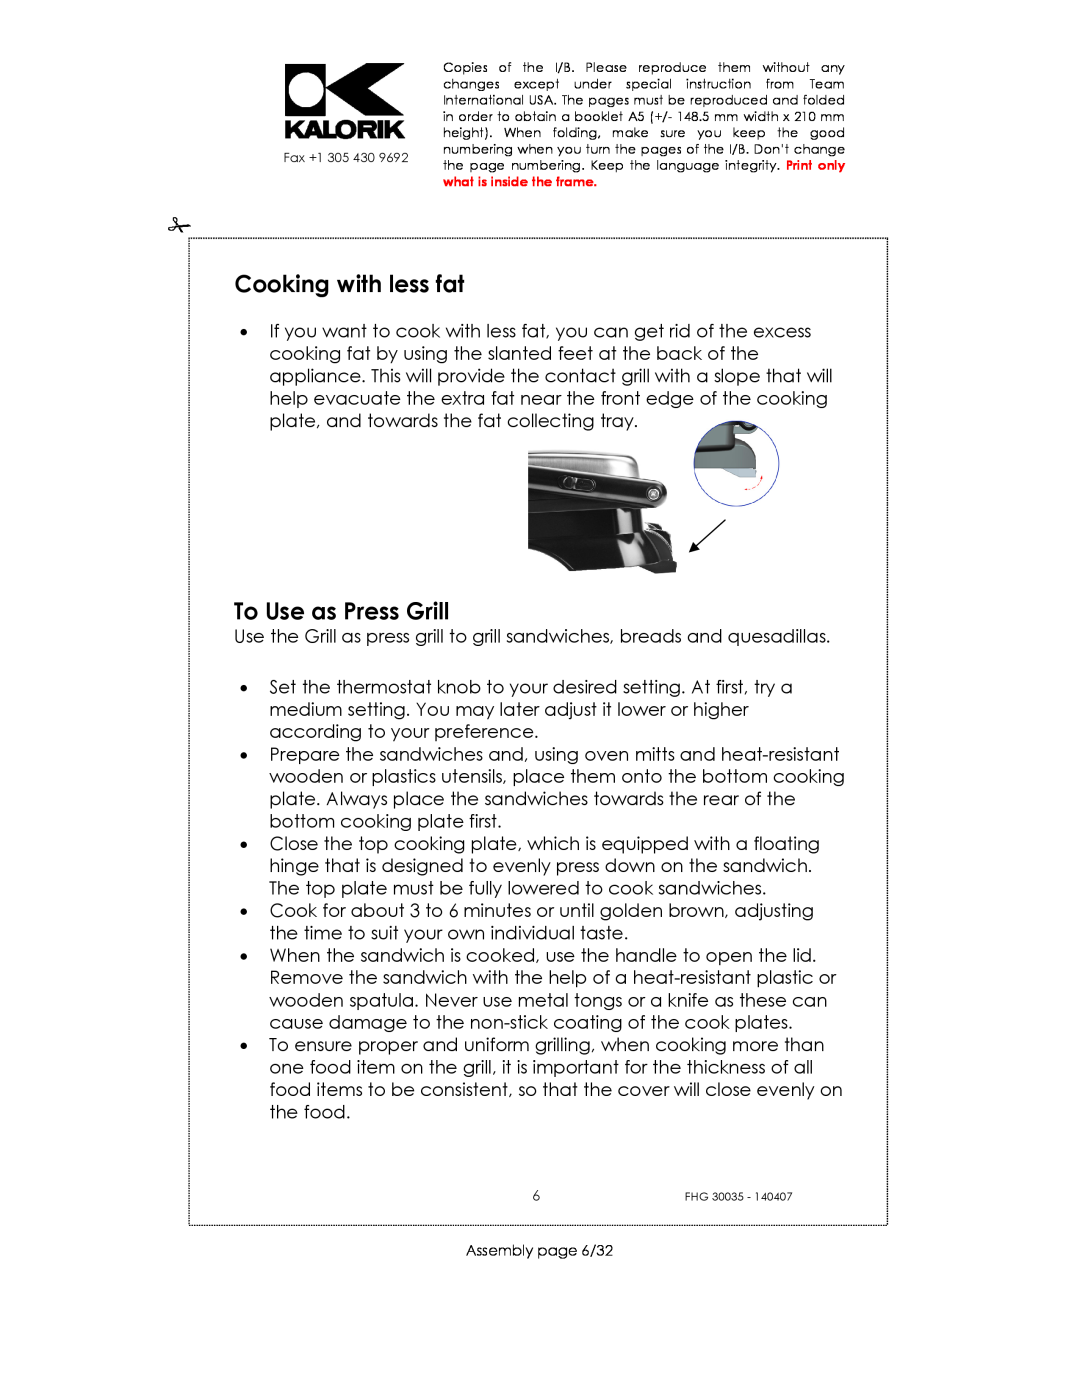 Kalorik FHG 30035 manual Cooking with less fat, To Use as Press Grill, Assembly page 6/32 